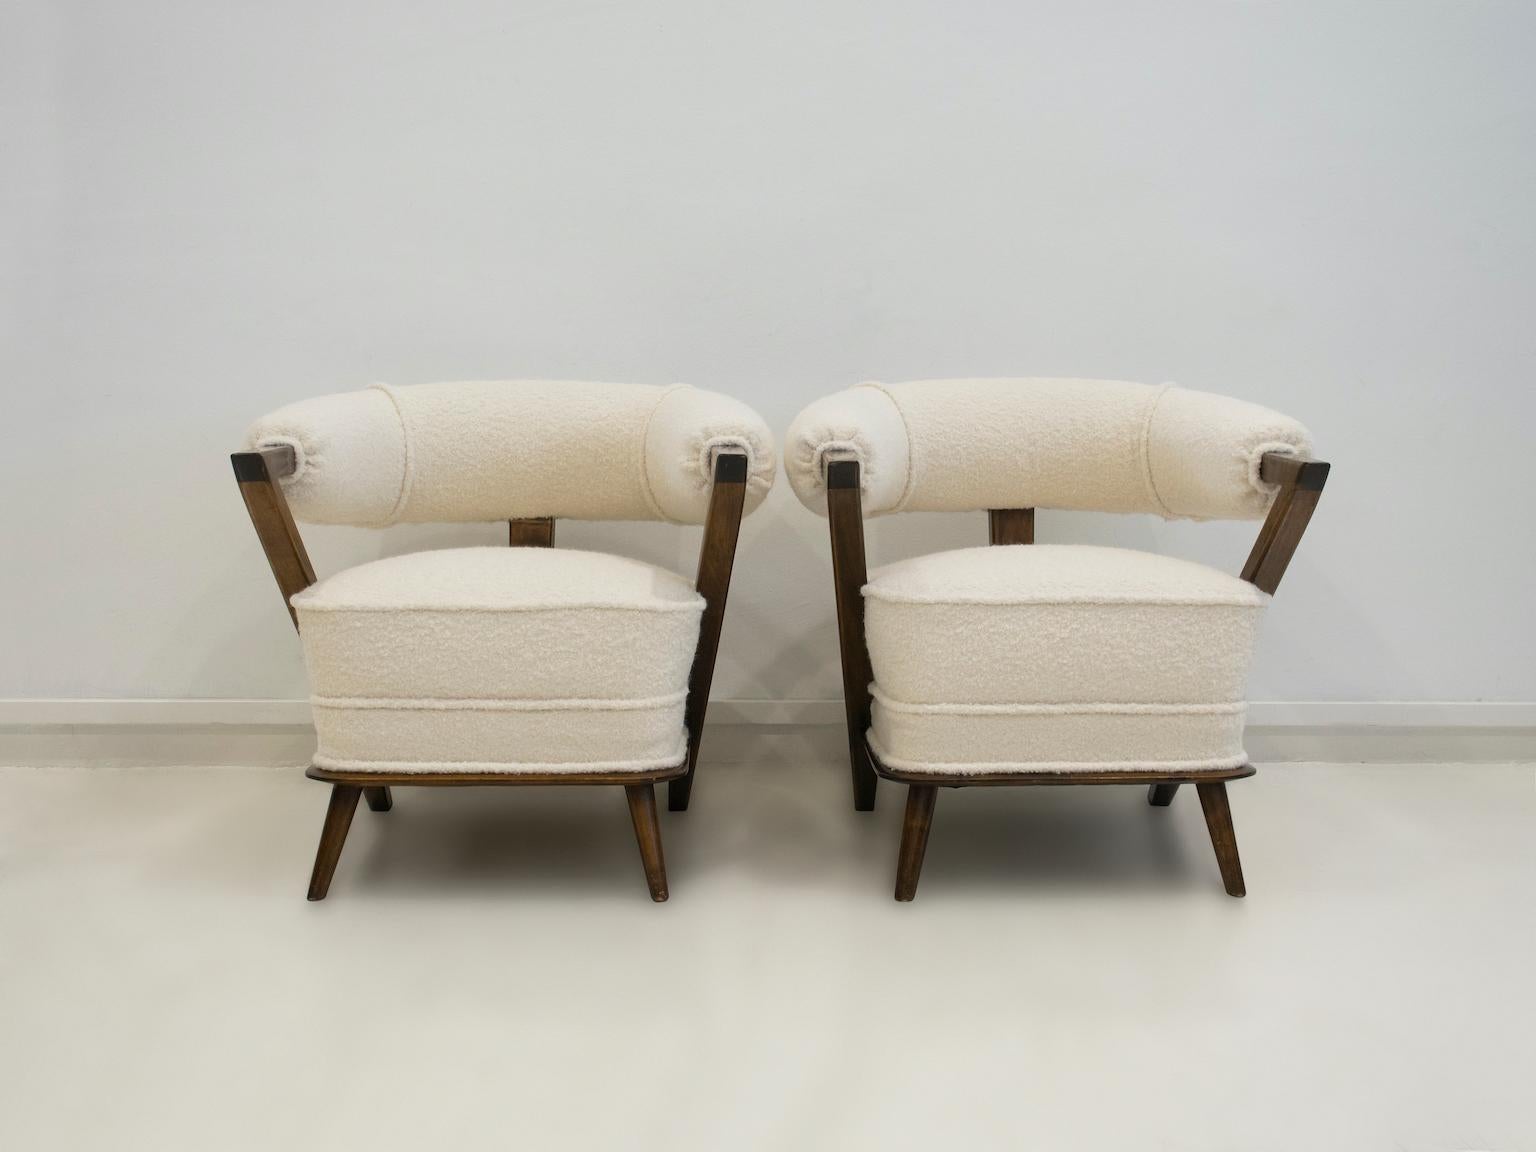 Pair elegant of white Art Deco tub armchairs, manufactured in Italy during the 1960s. Dark stained wood frame and new white bouclé fabric upholstery. Minor wear on the wooden part of the armrests.